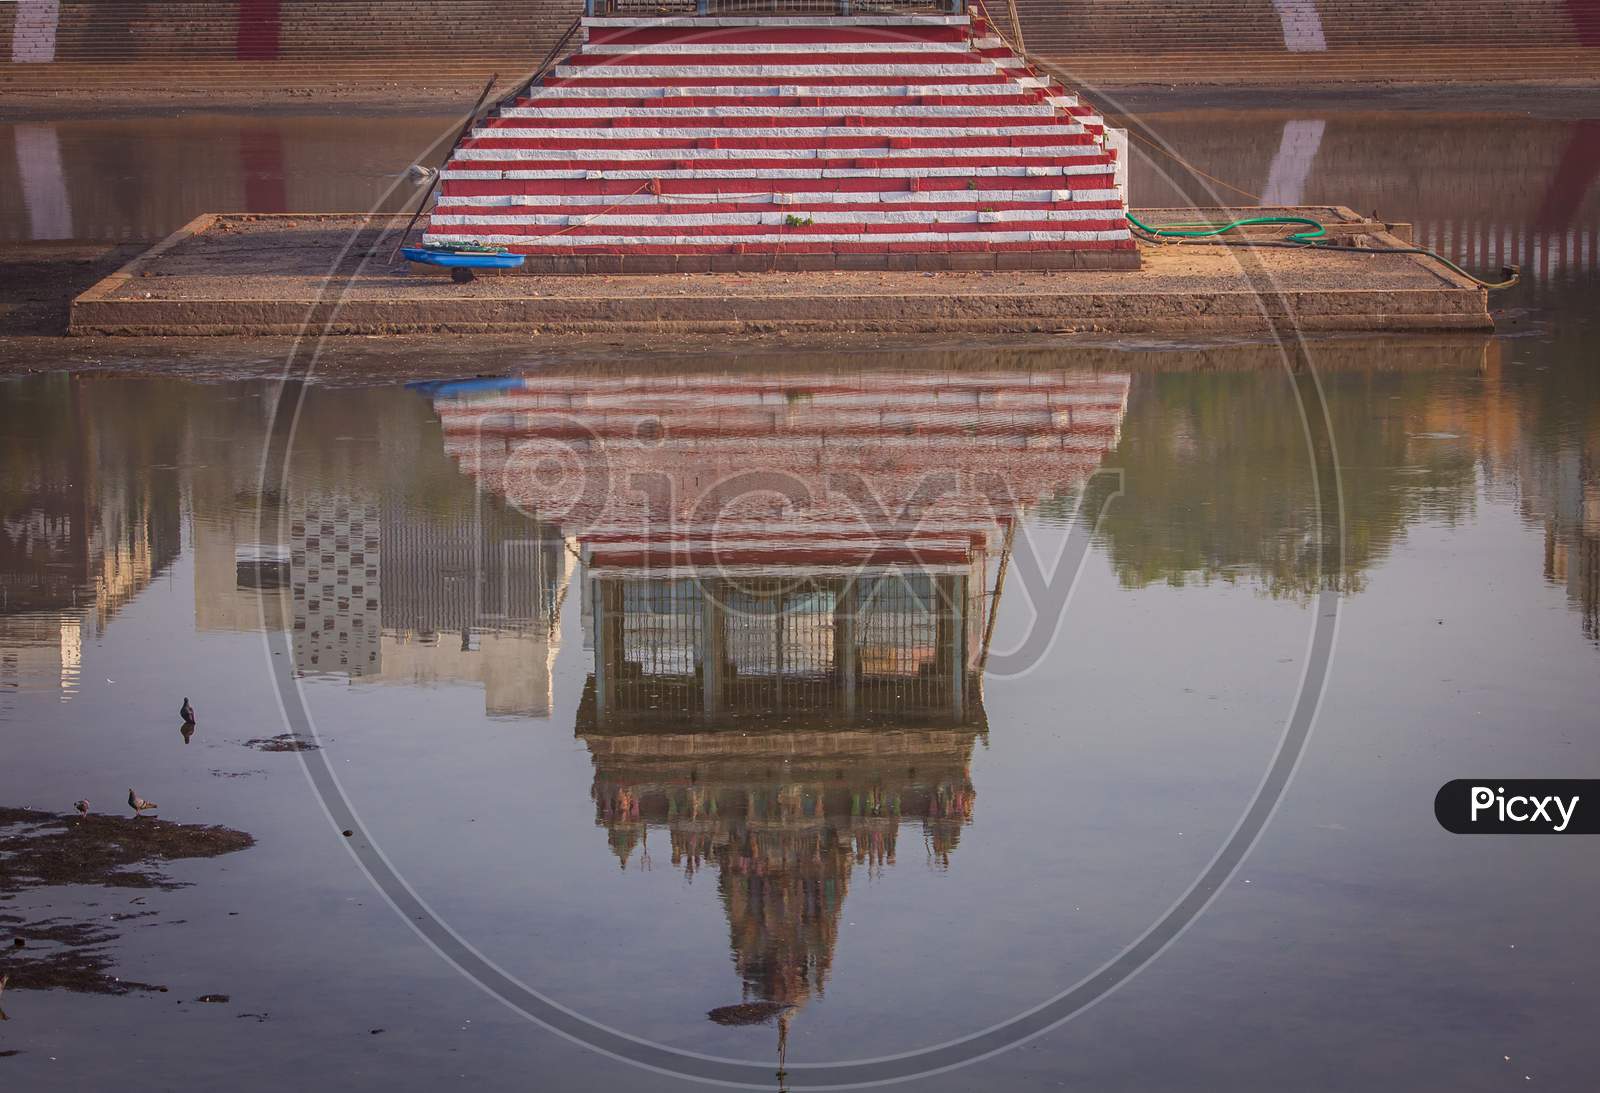 Reflection Of The Temple Tower In The Temple Tank Which Stores Water